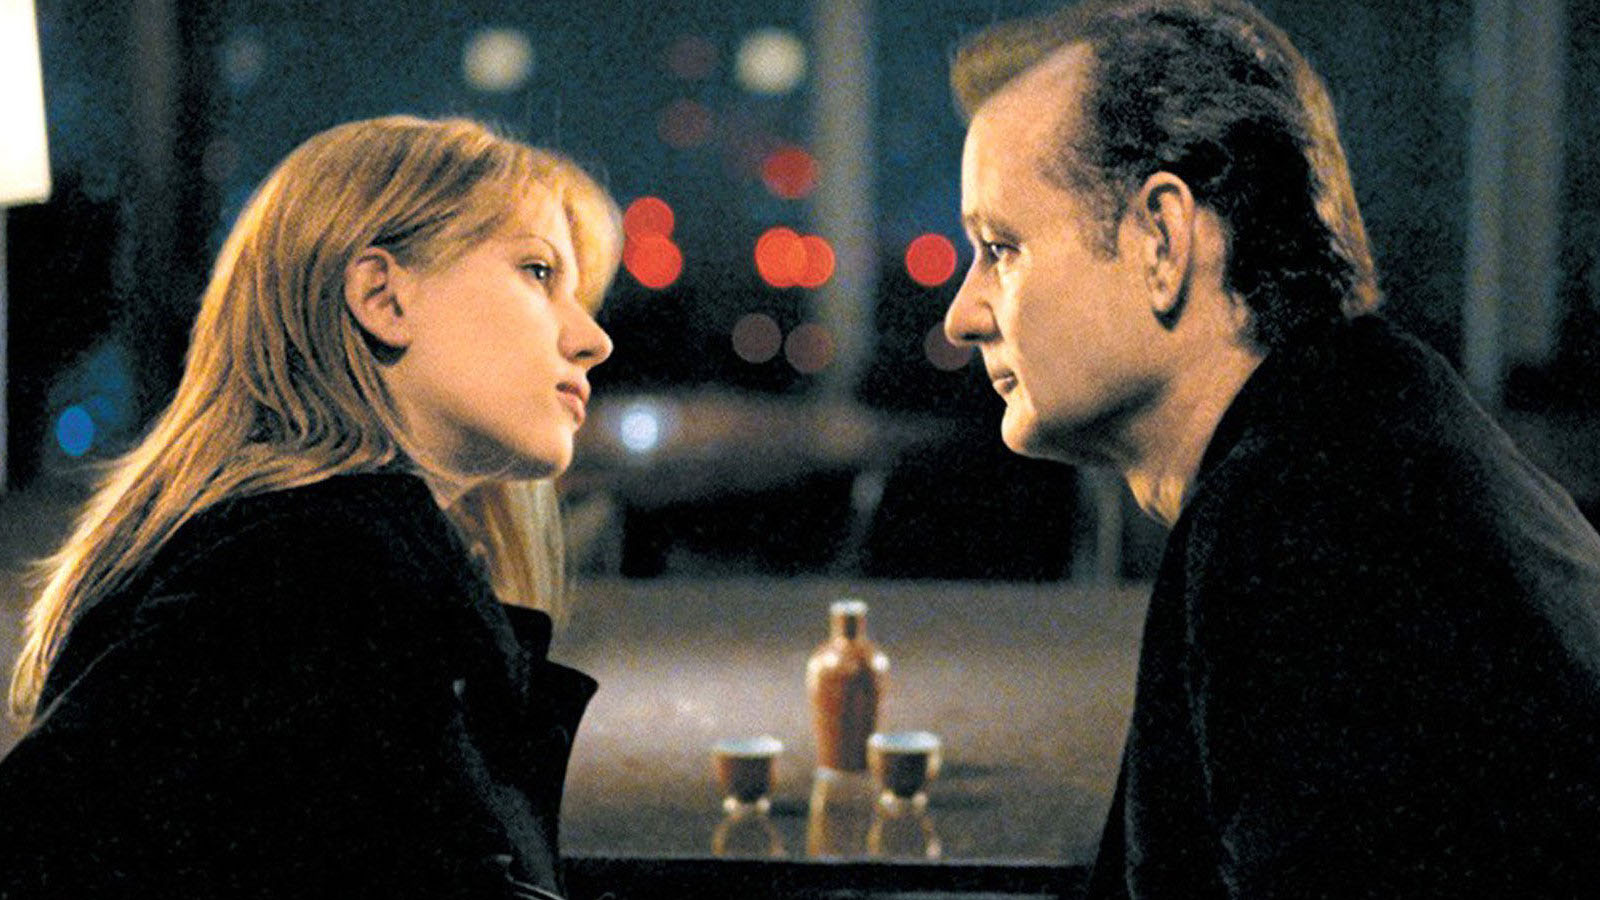 Lost in Translation, Sofia Coppola: “My children asked me why he was so much older than her”